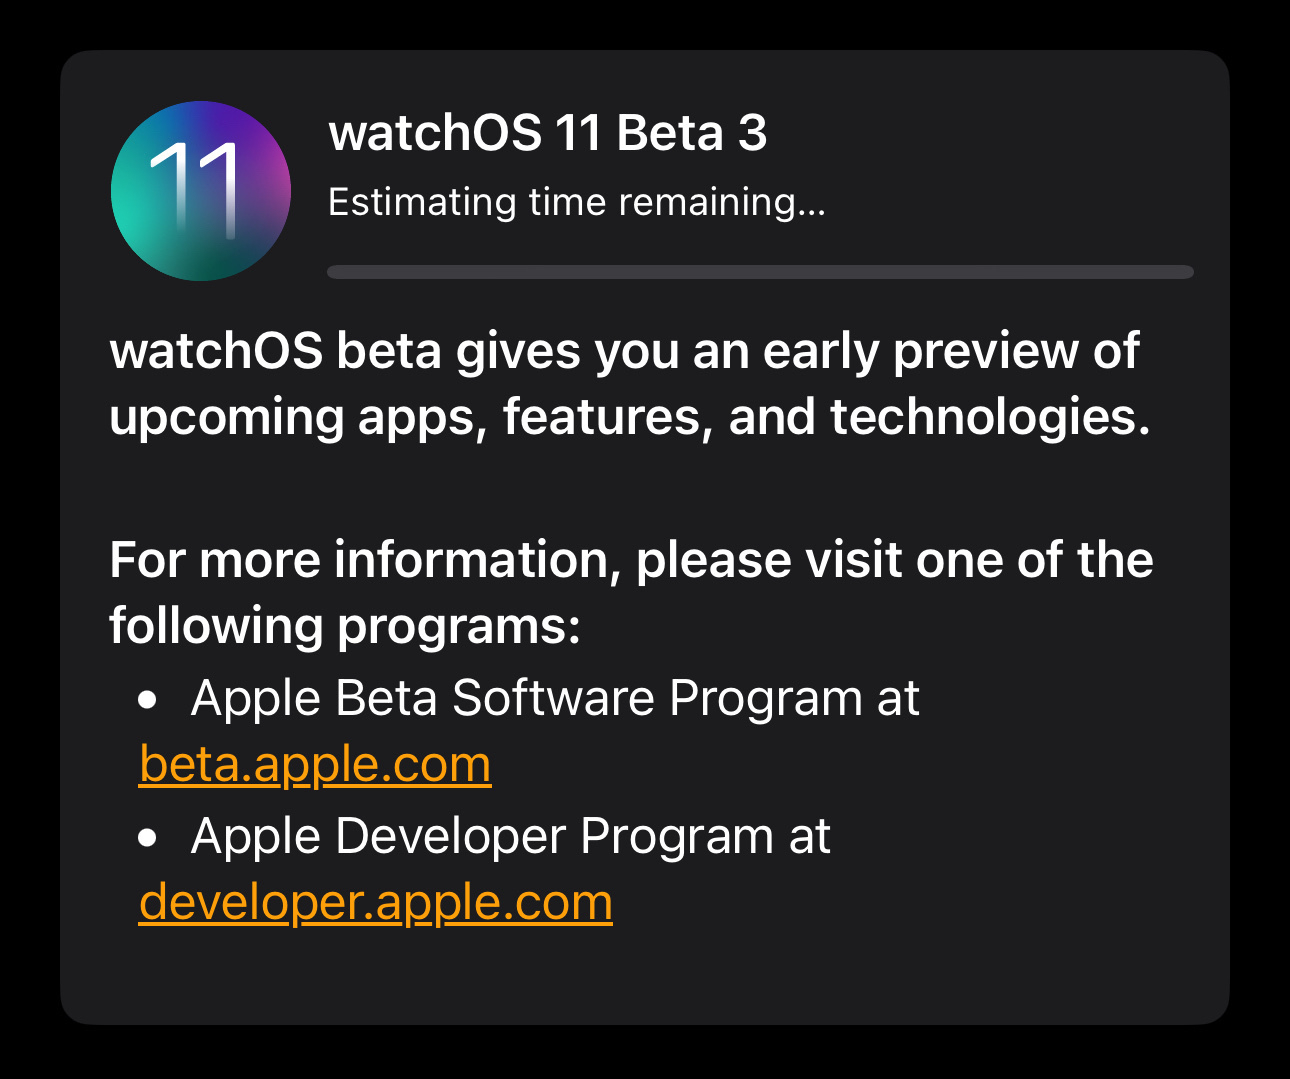 A notification for watchOS 11 Beta 3 offers an early preview of new apps, features, and technologies, providing links to the Apple Beta Software Program and Apple Developer Program.